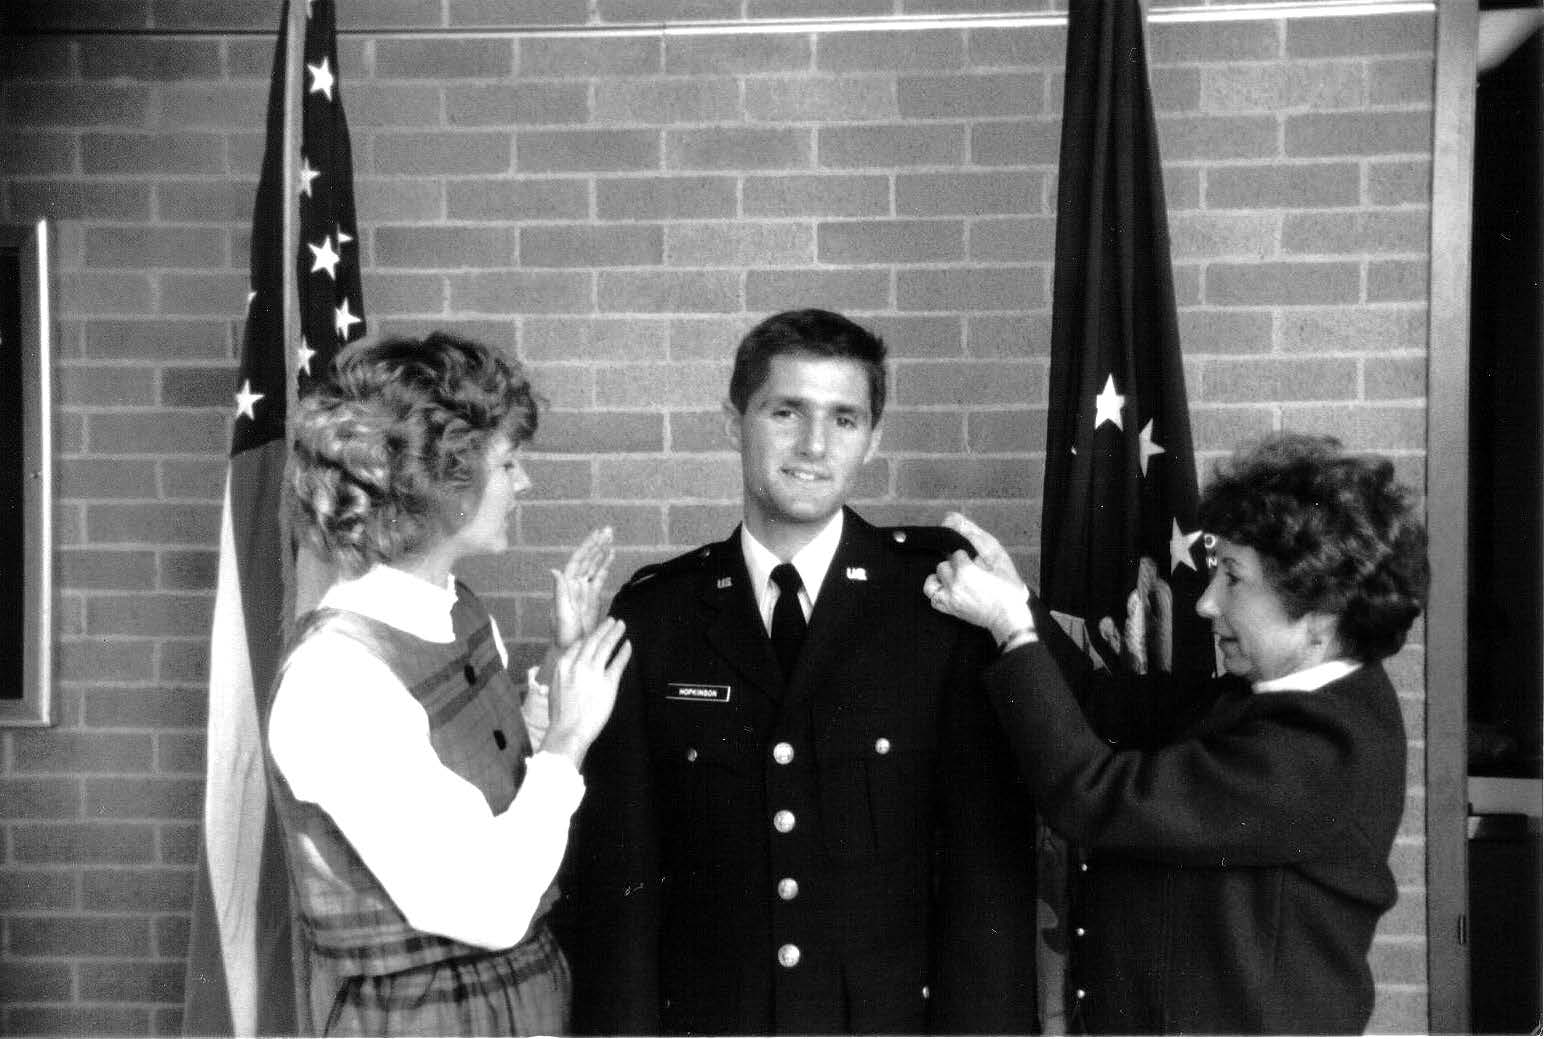 Russell Hopkinson’s commissioning ceremony at Brigham Young University (December 1986). Courtesy of Russell H. Hopkinson.